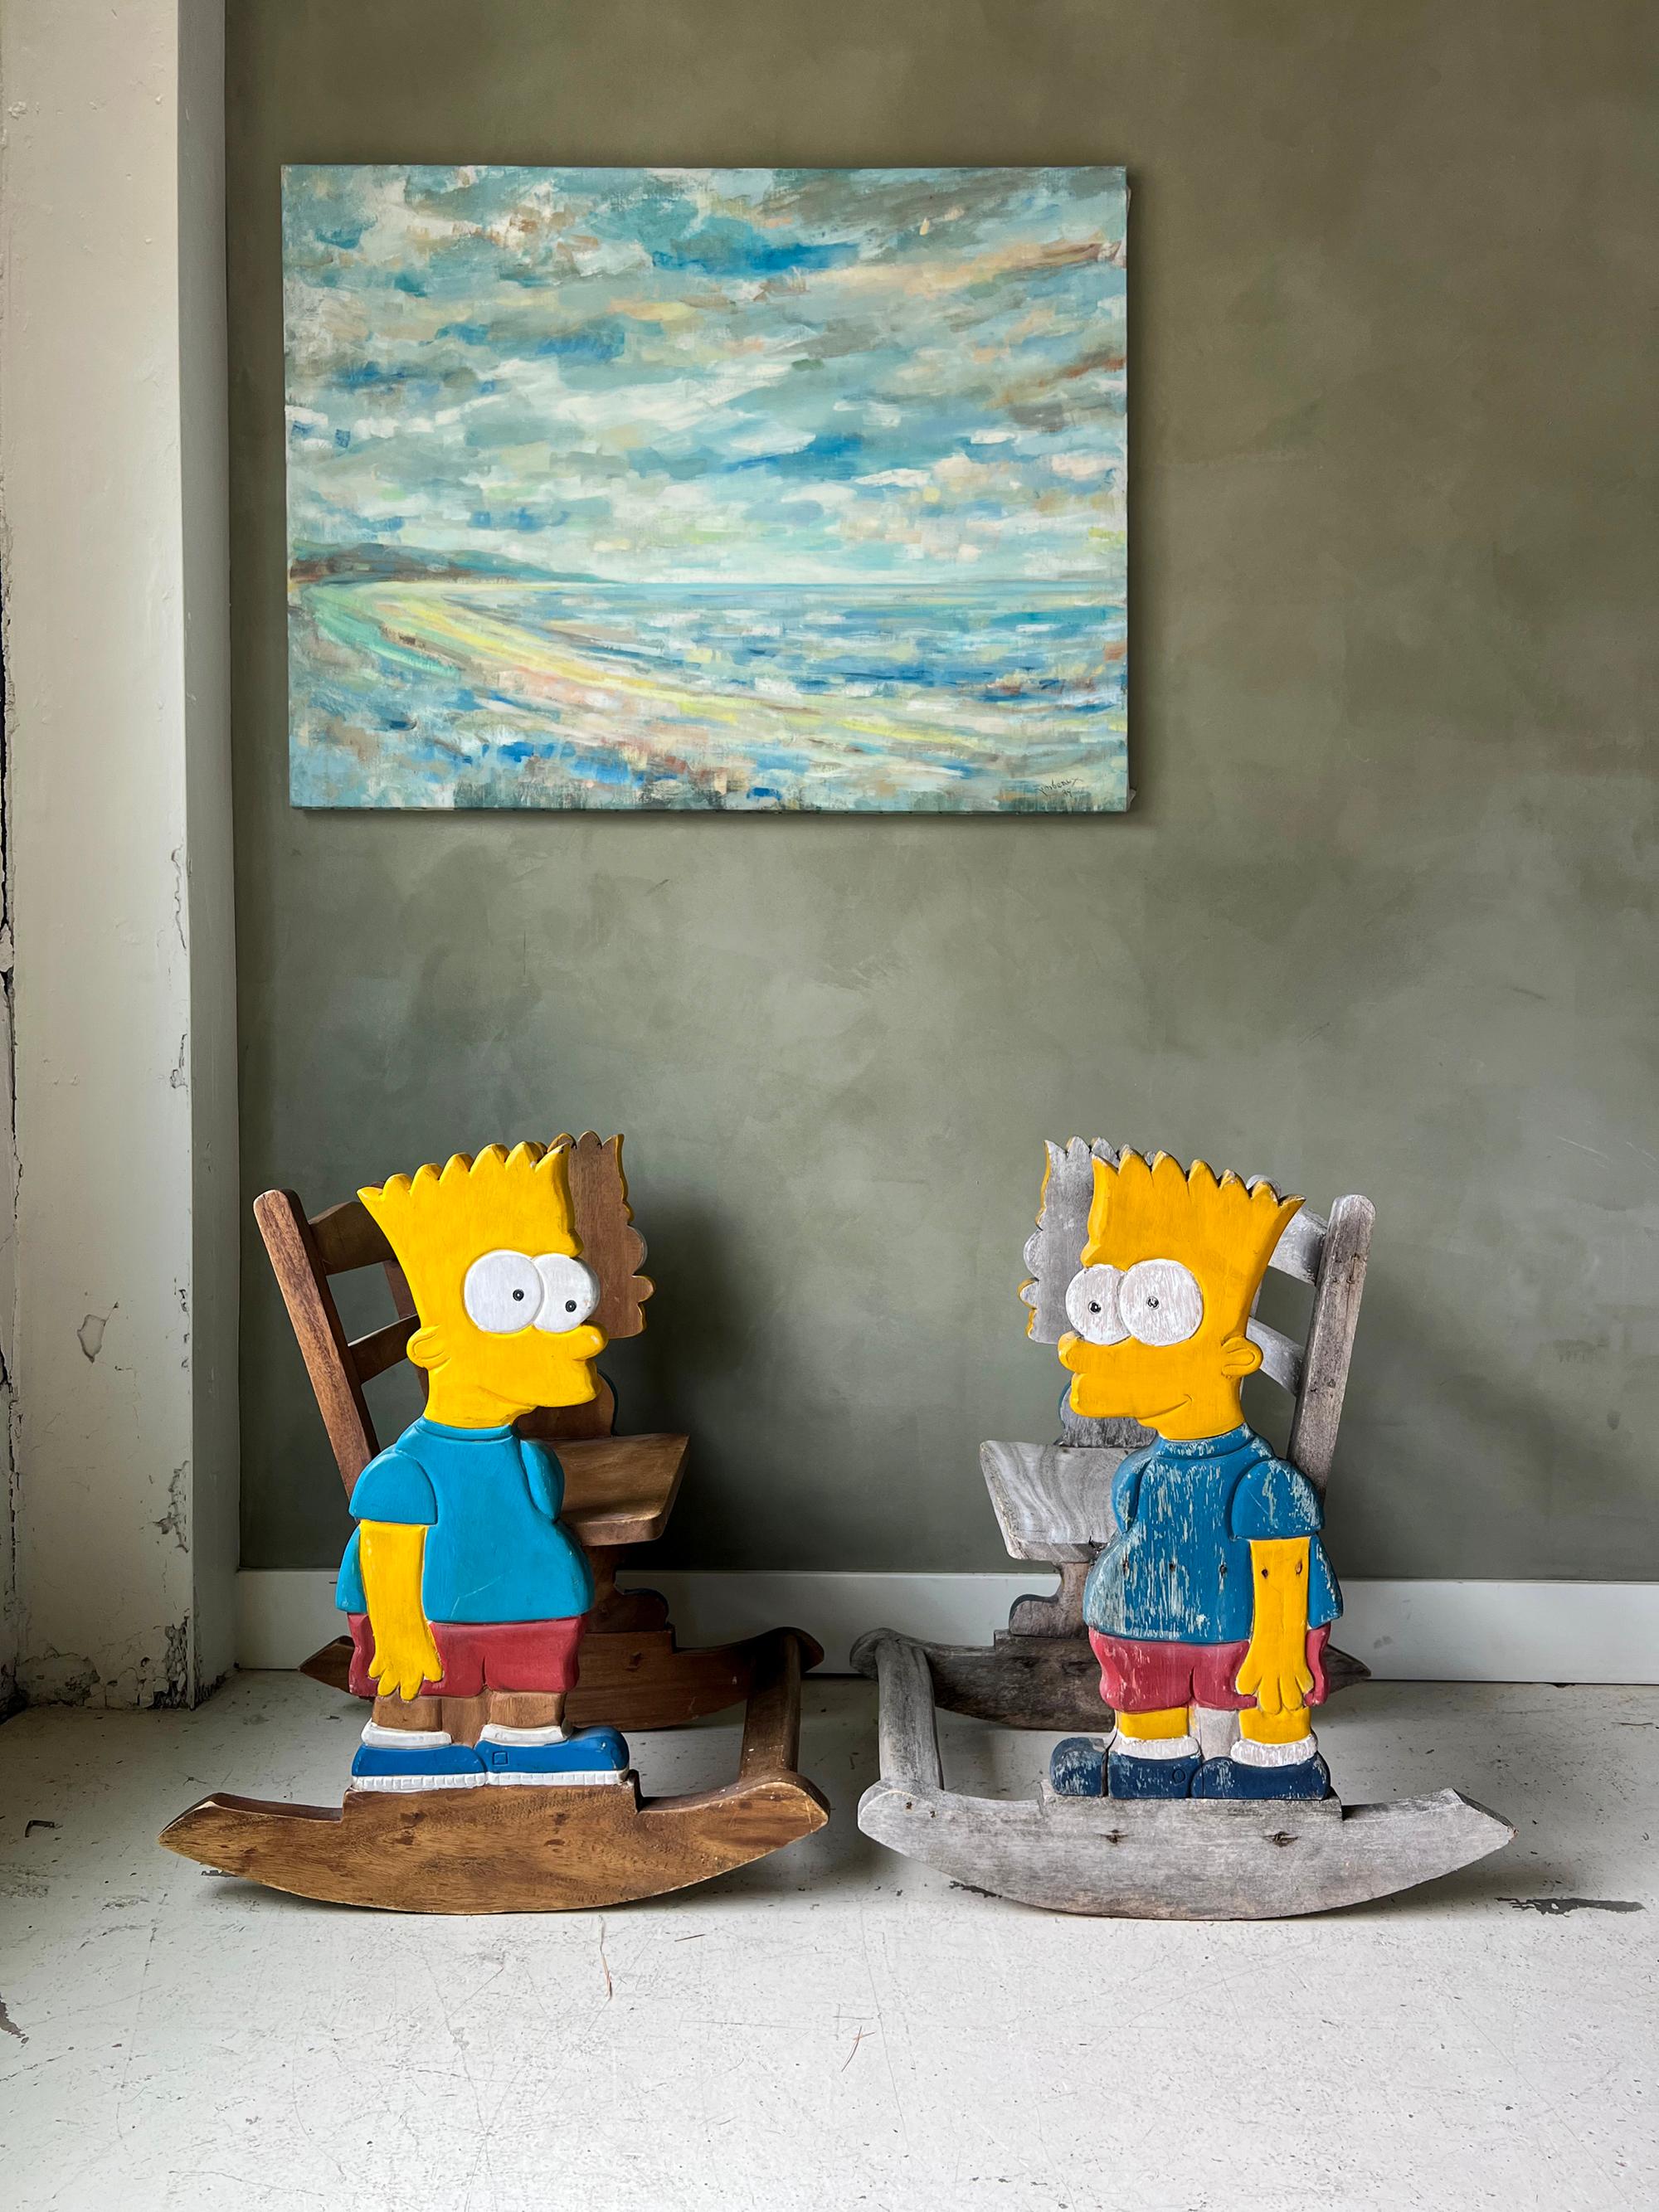 Pair of handmade Bart Simpson child-size rocking chairs. Vintage condition, one is more worn than the other but both show wear consistent with age. Solid wood construction, nice details showing the clothes, shoes, and facial features. One-of-a-kind